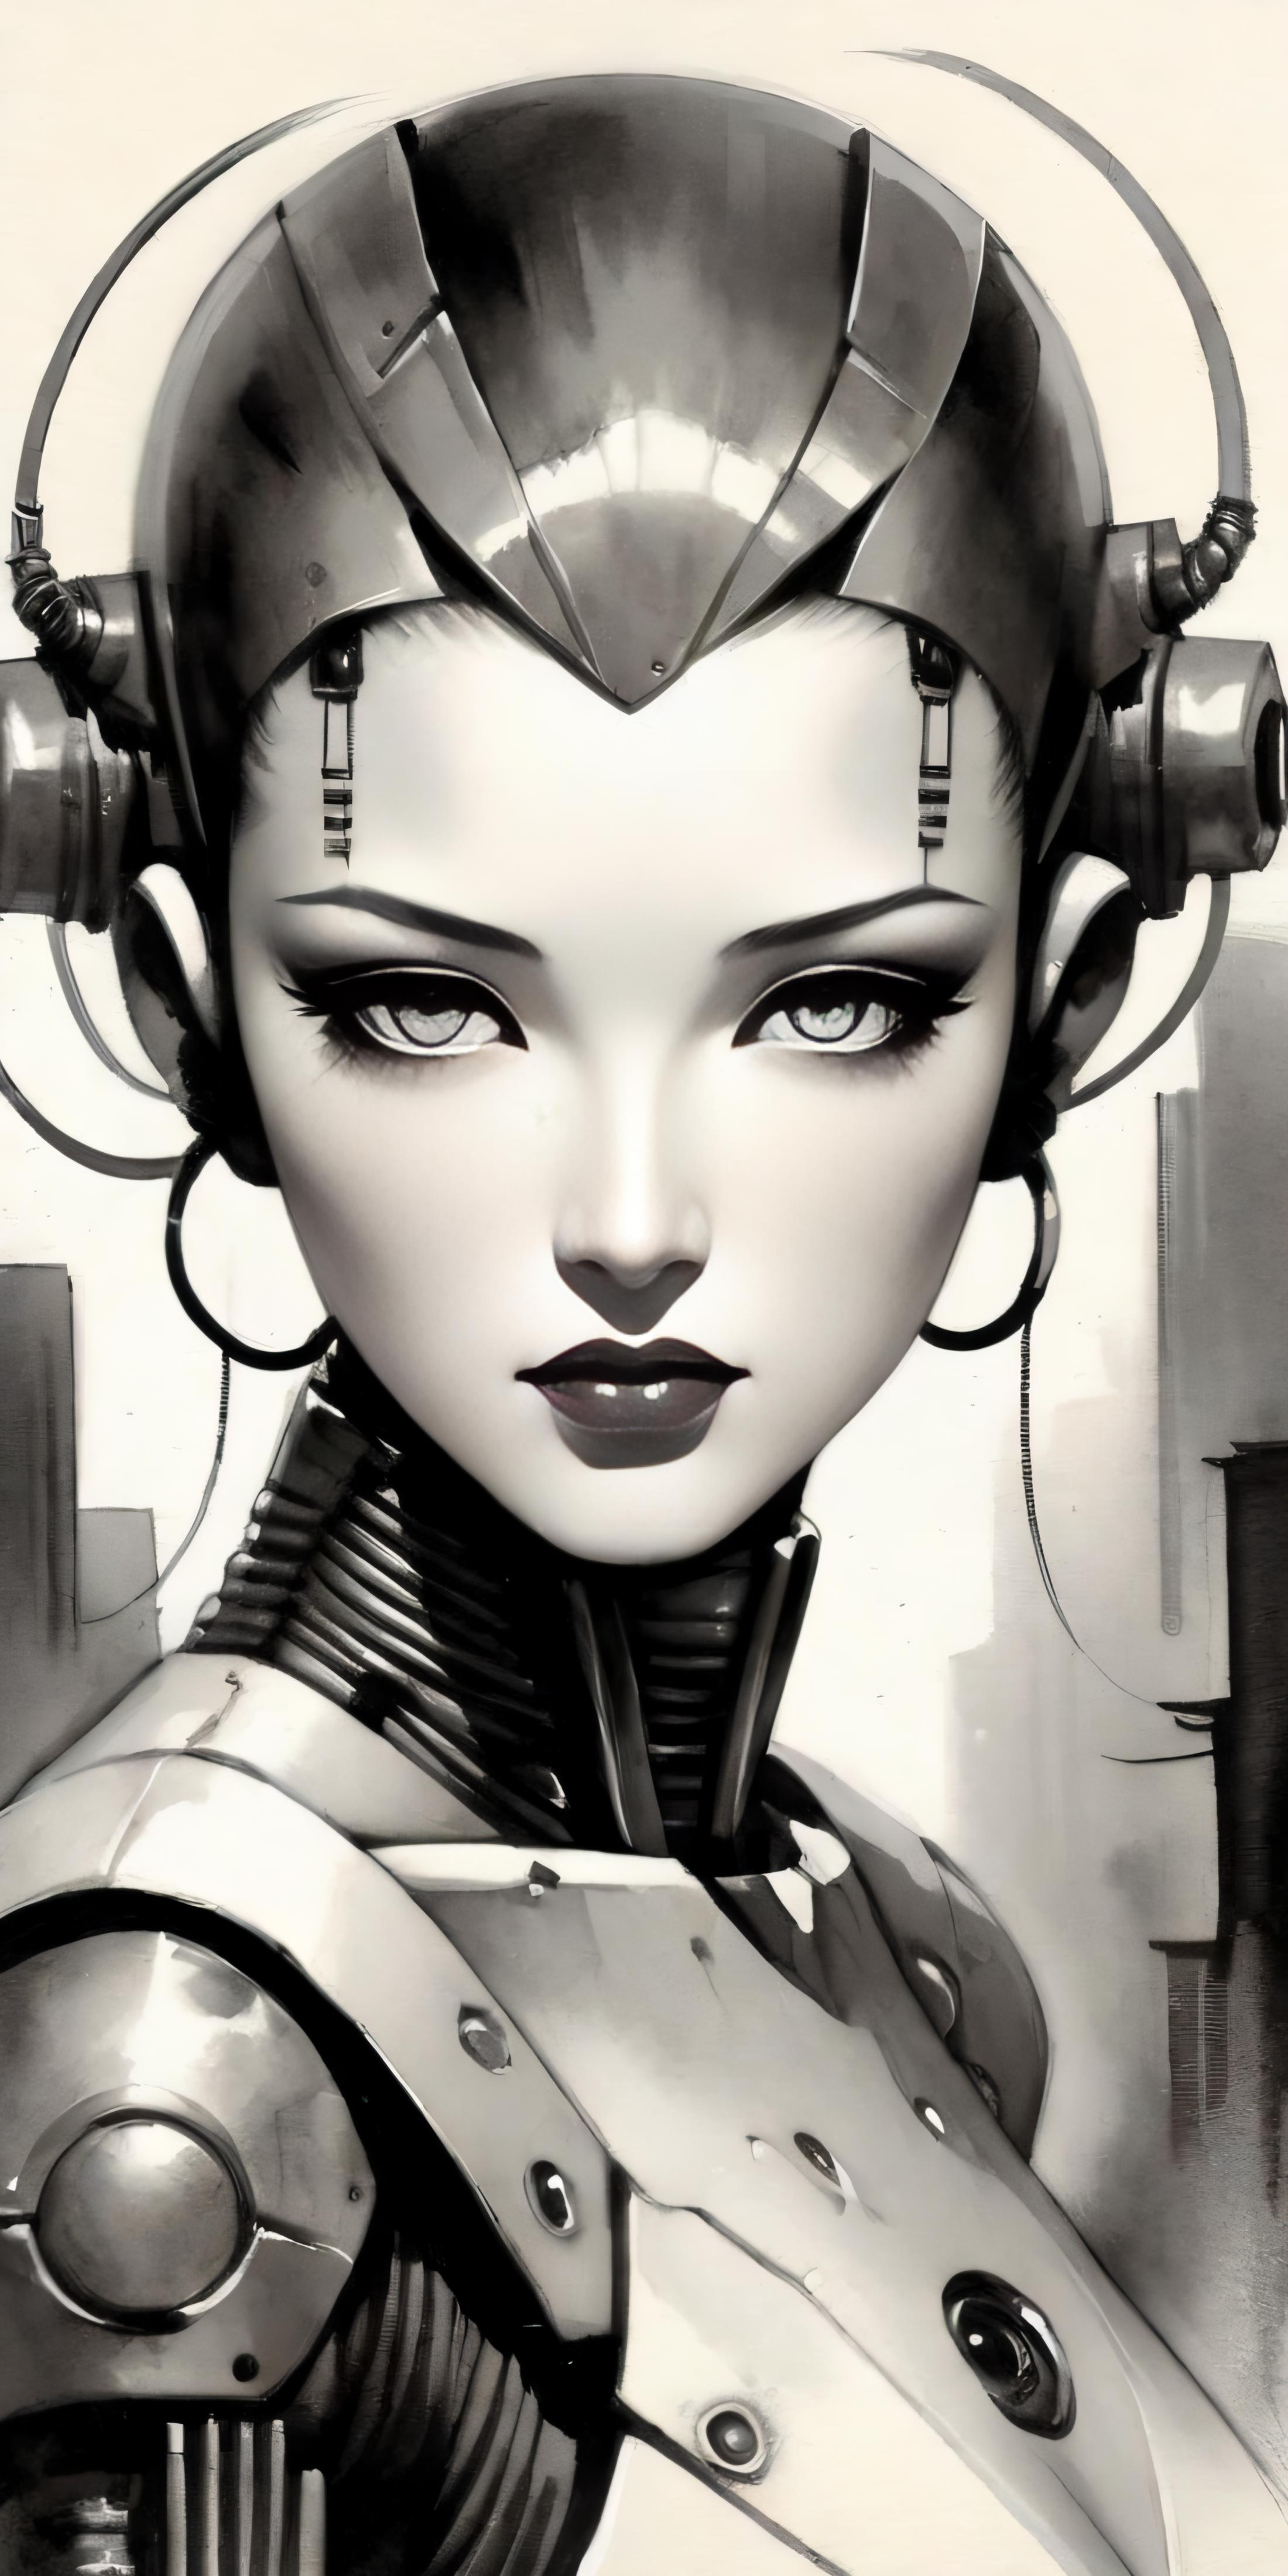 A digital drawing of a robot woman with blue eyes, wearing earrings and a lipstick smirk.